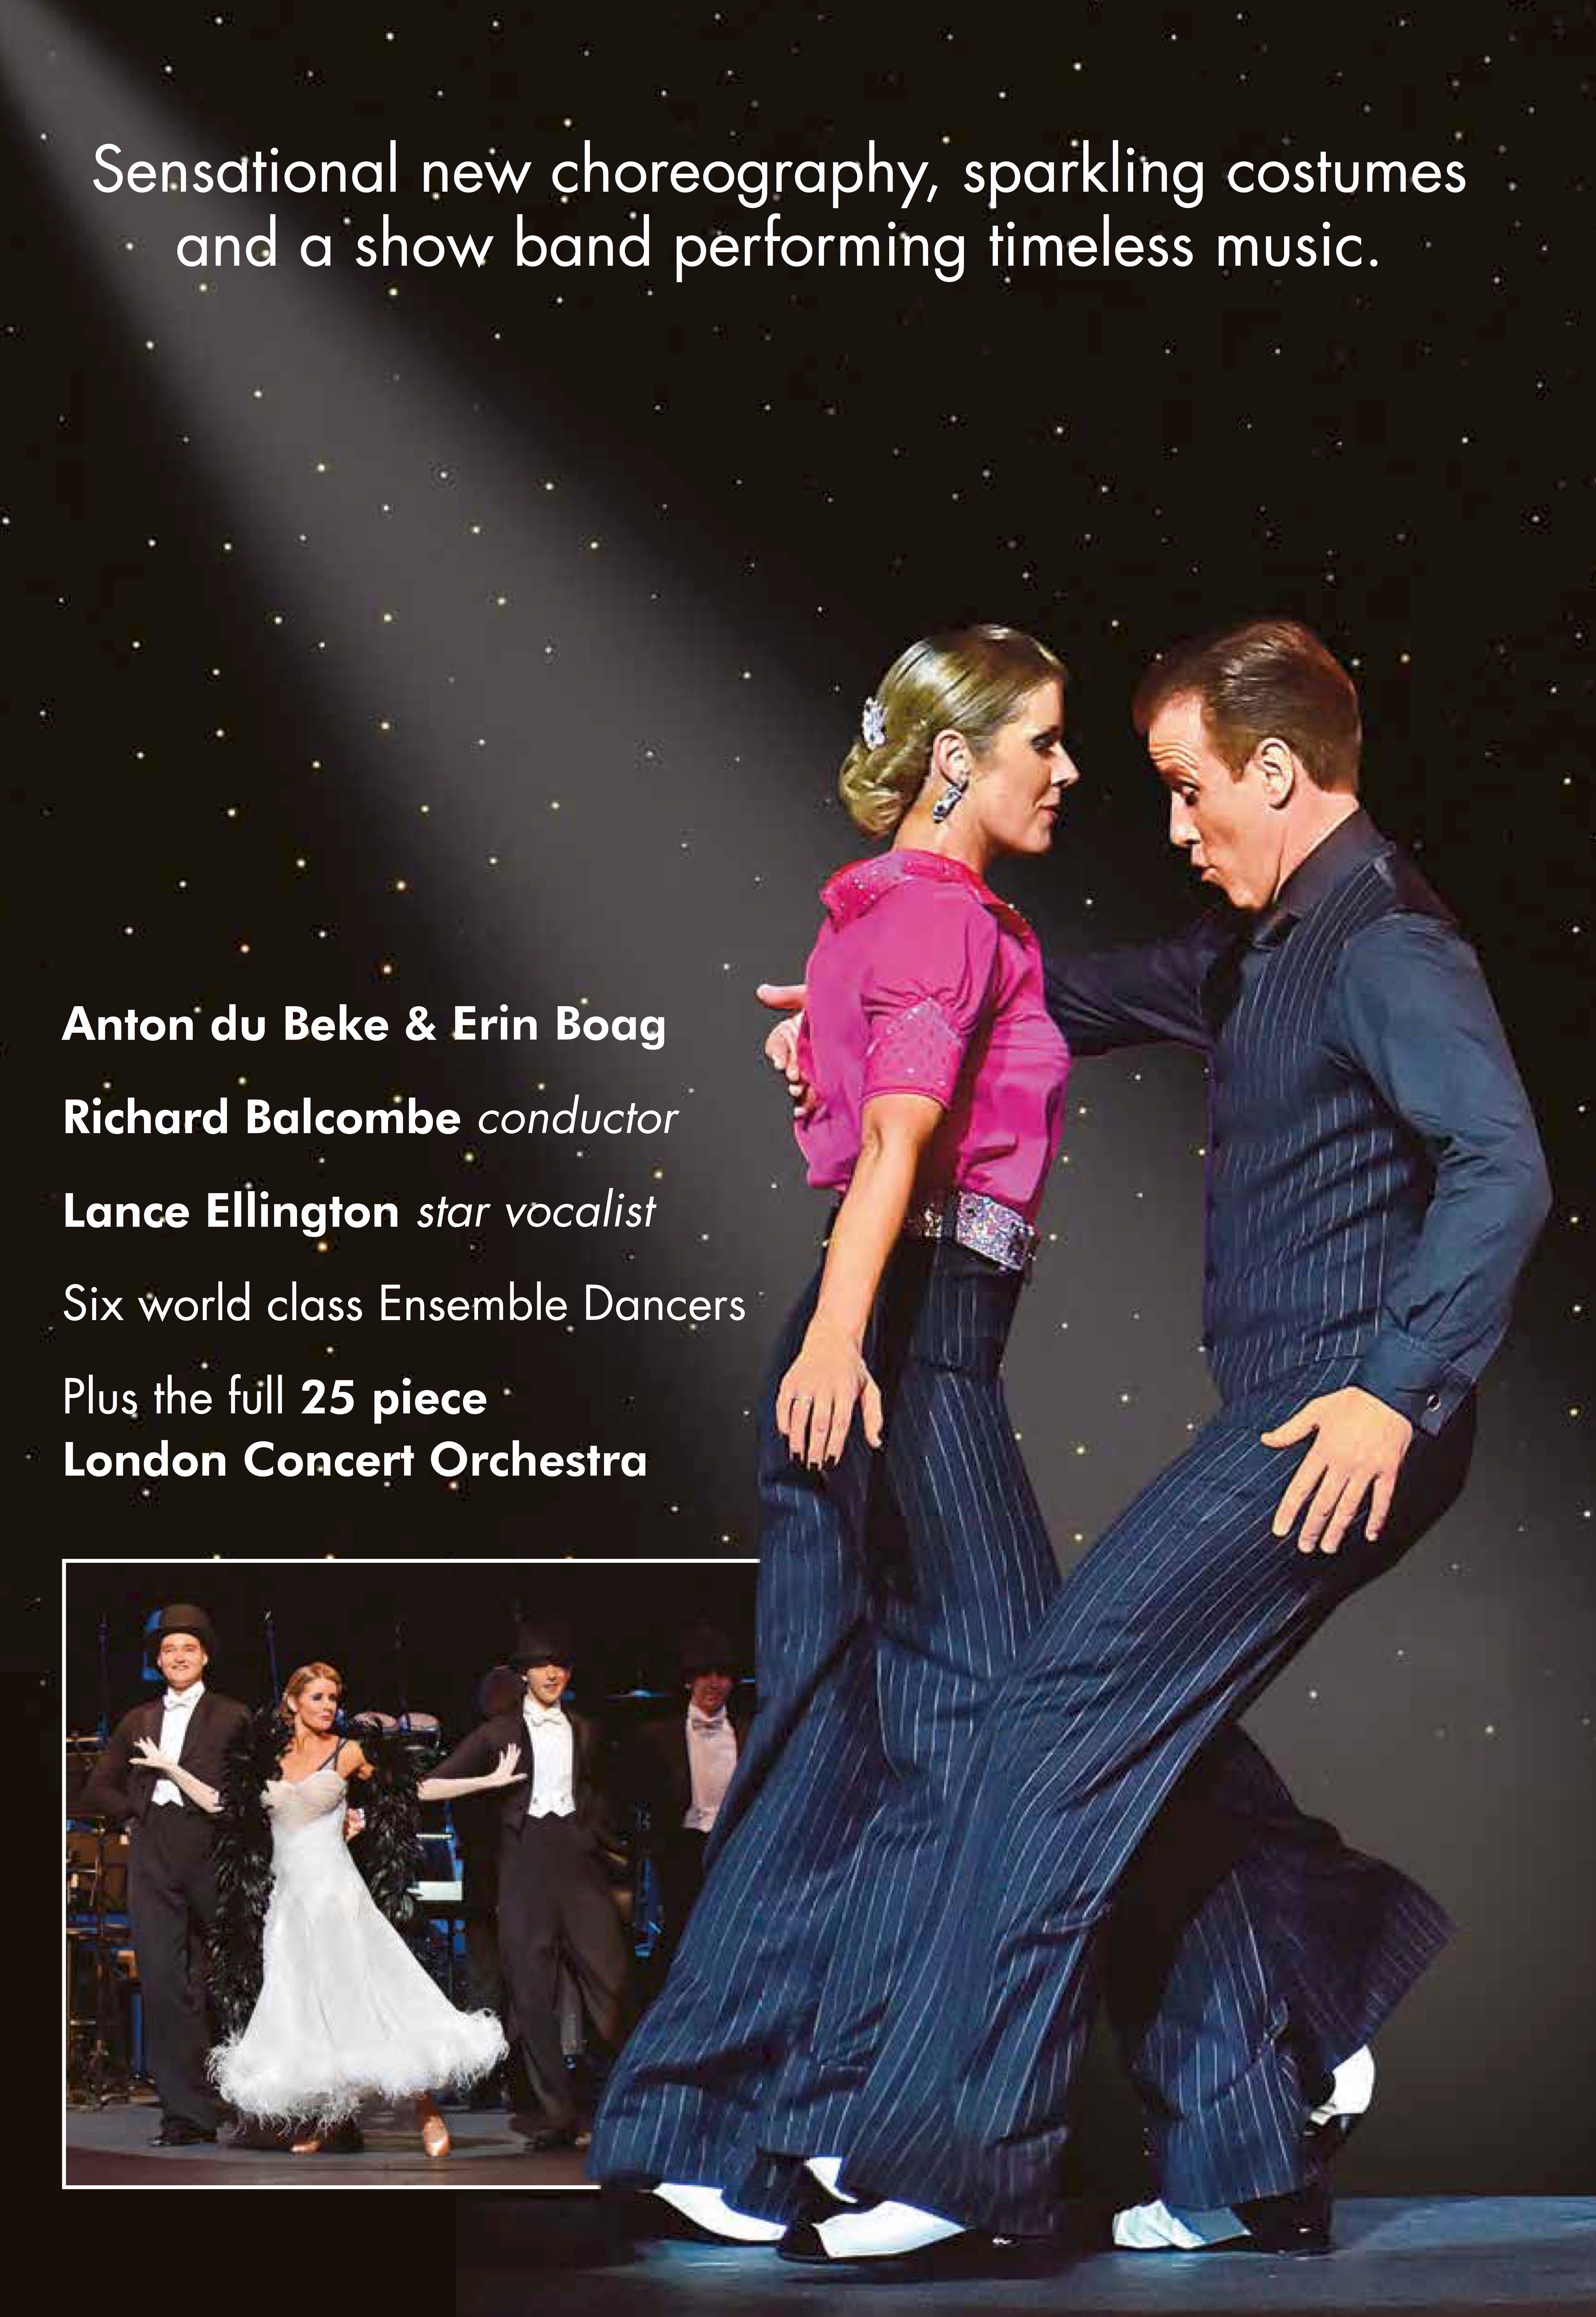 Strictly Come Dancing Star Anton du Beke invites 2 guests to meet him on his tour of Swing Time - Image 2 of 3